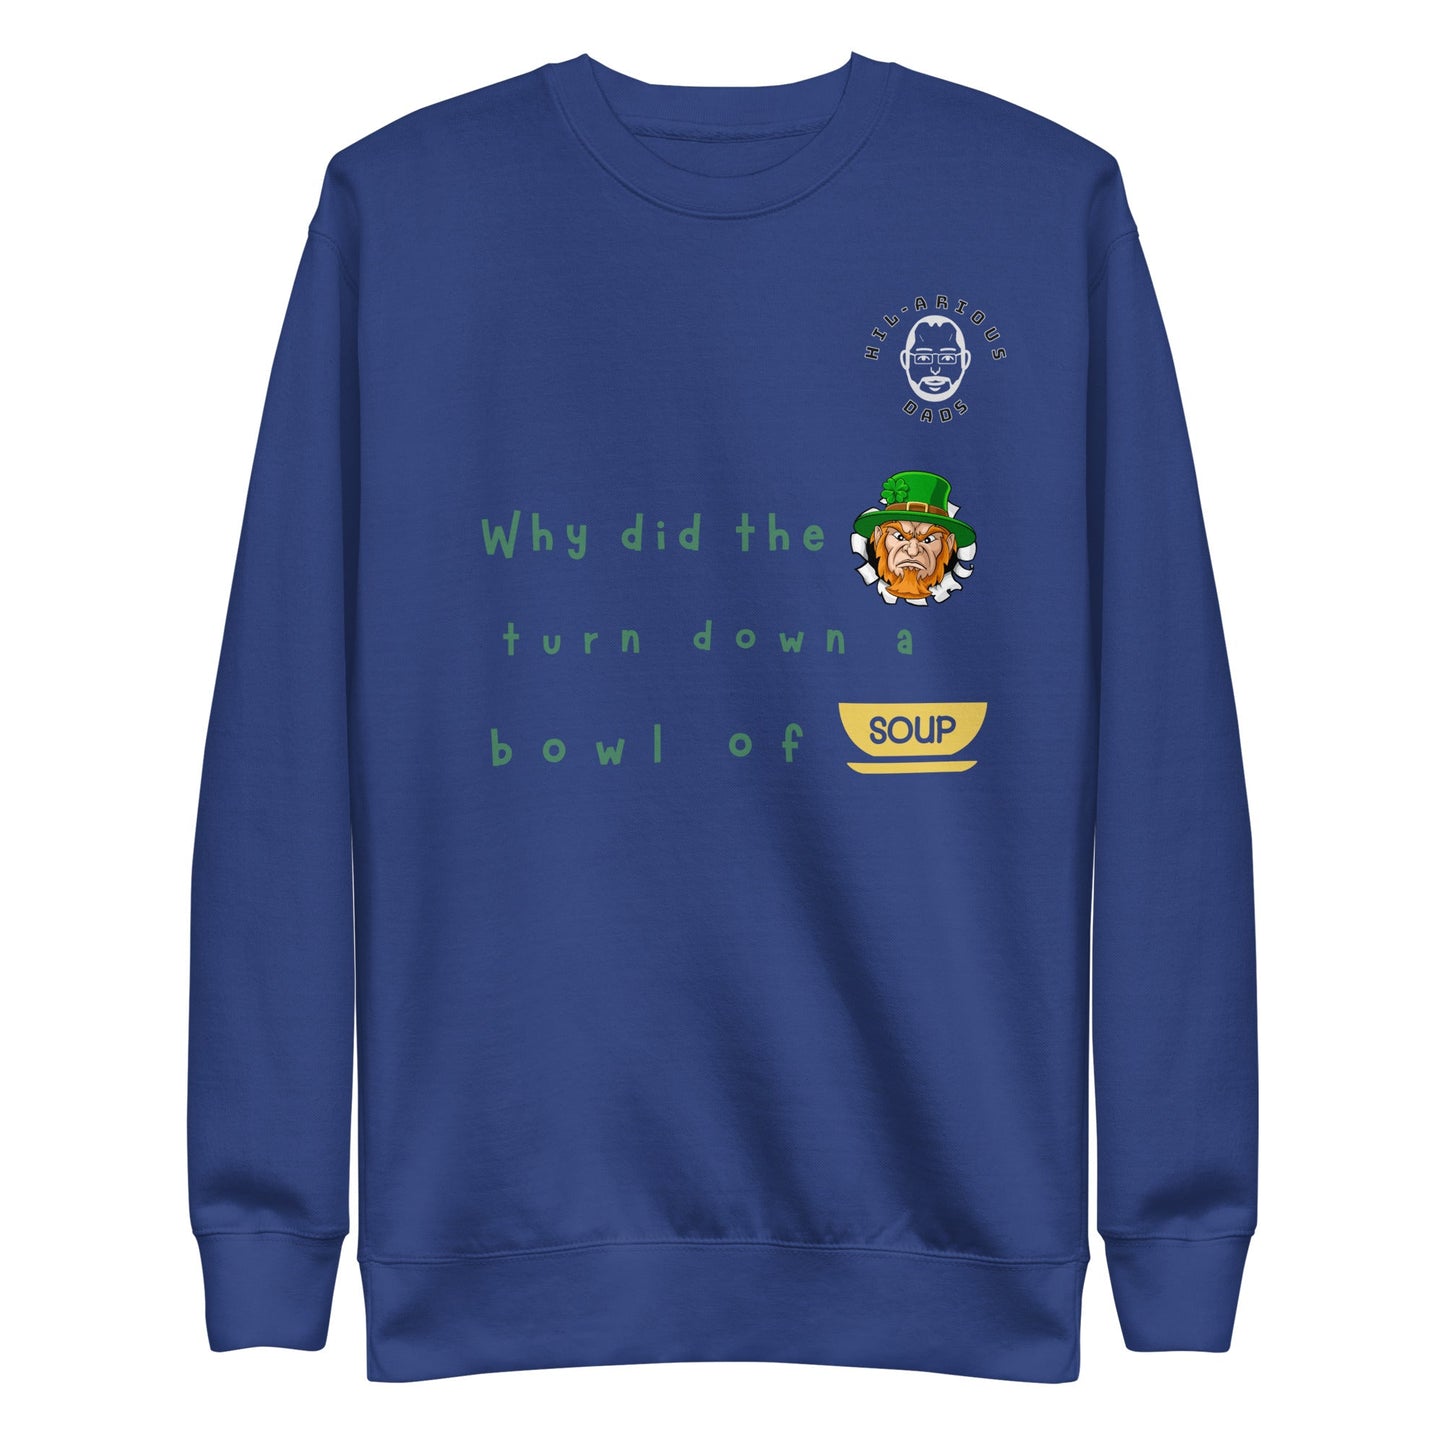 Why did the leprechaun turn down a bowl of soup?-Sweatshirt - Hil-arious Dads